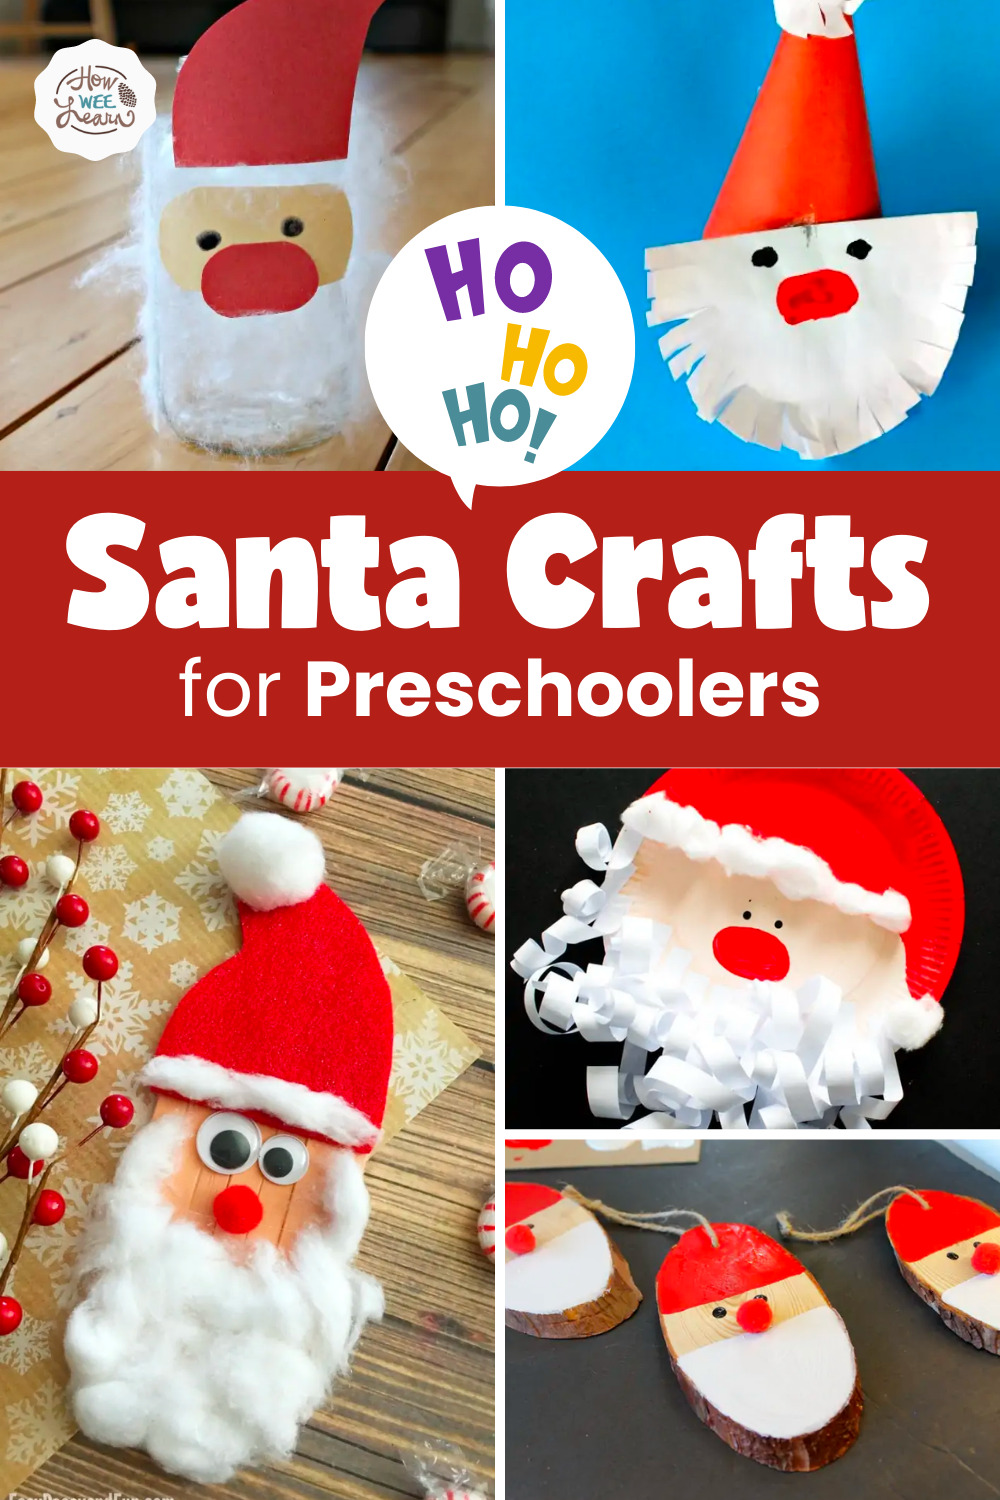 Christmas crafting fun! These Santa crafts are a definite must try with the kids this holiday season. #christmas #crats #holidaycrafts #santa #art #kids #kidsactivities #kidscrafts #winter